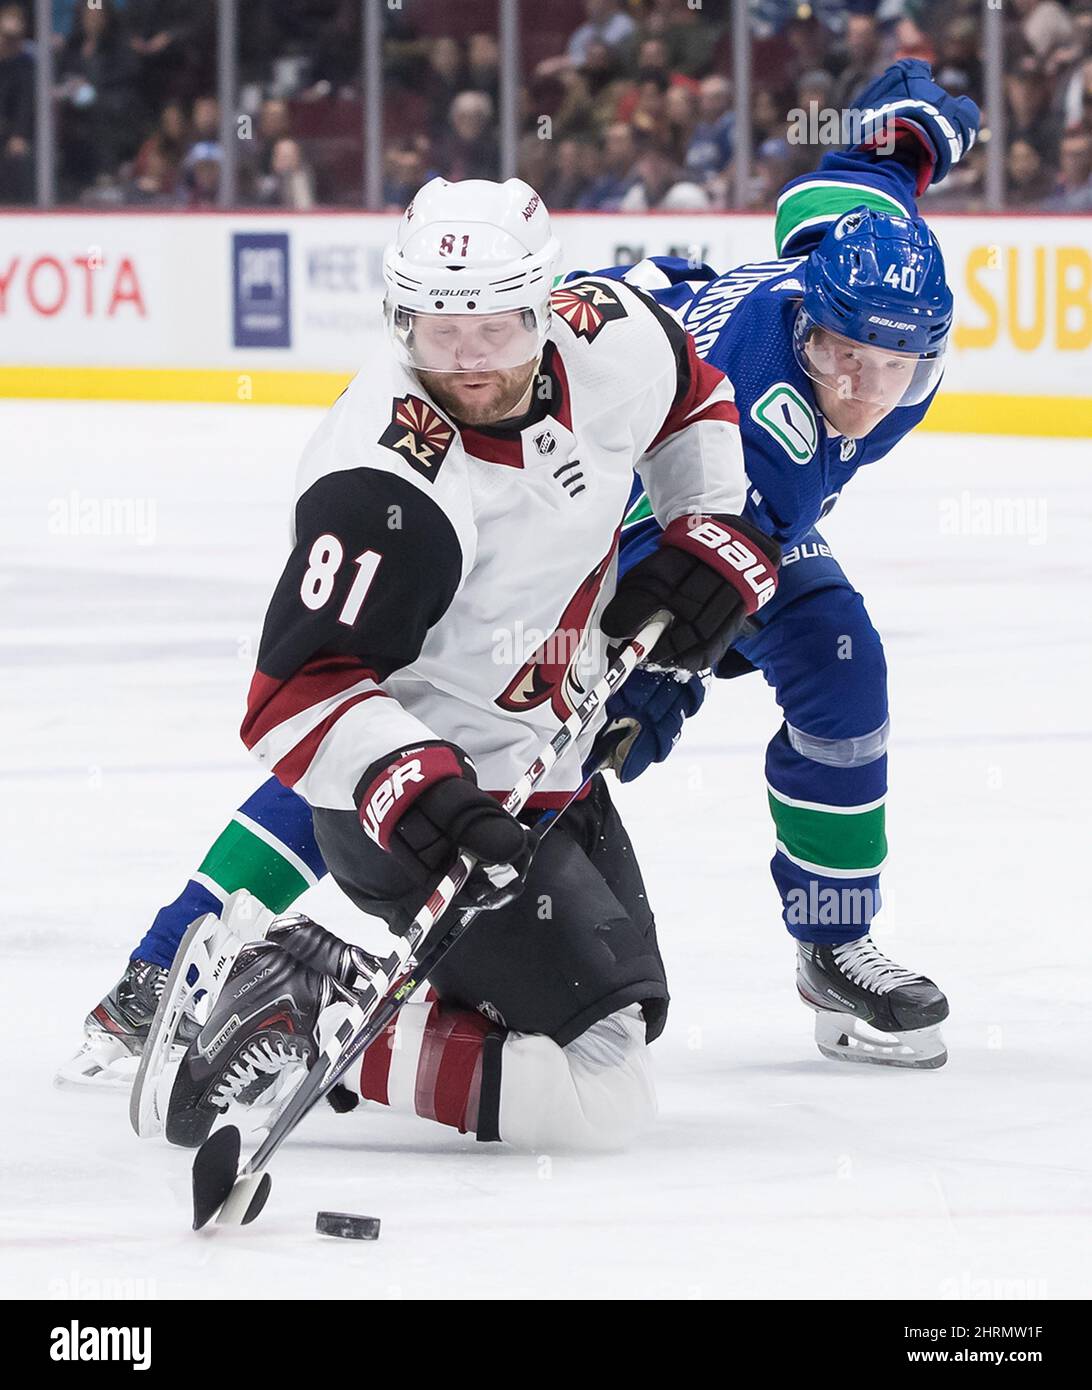 Arizona Coyotes' Phil Kessel (81) fights for control of the puck